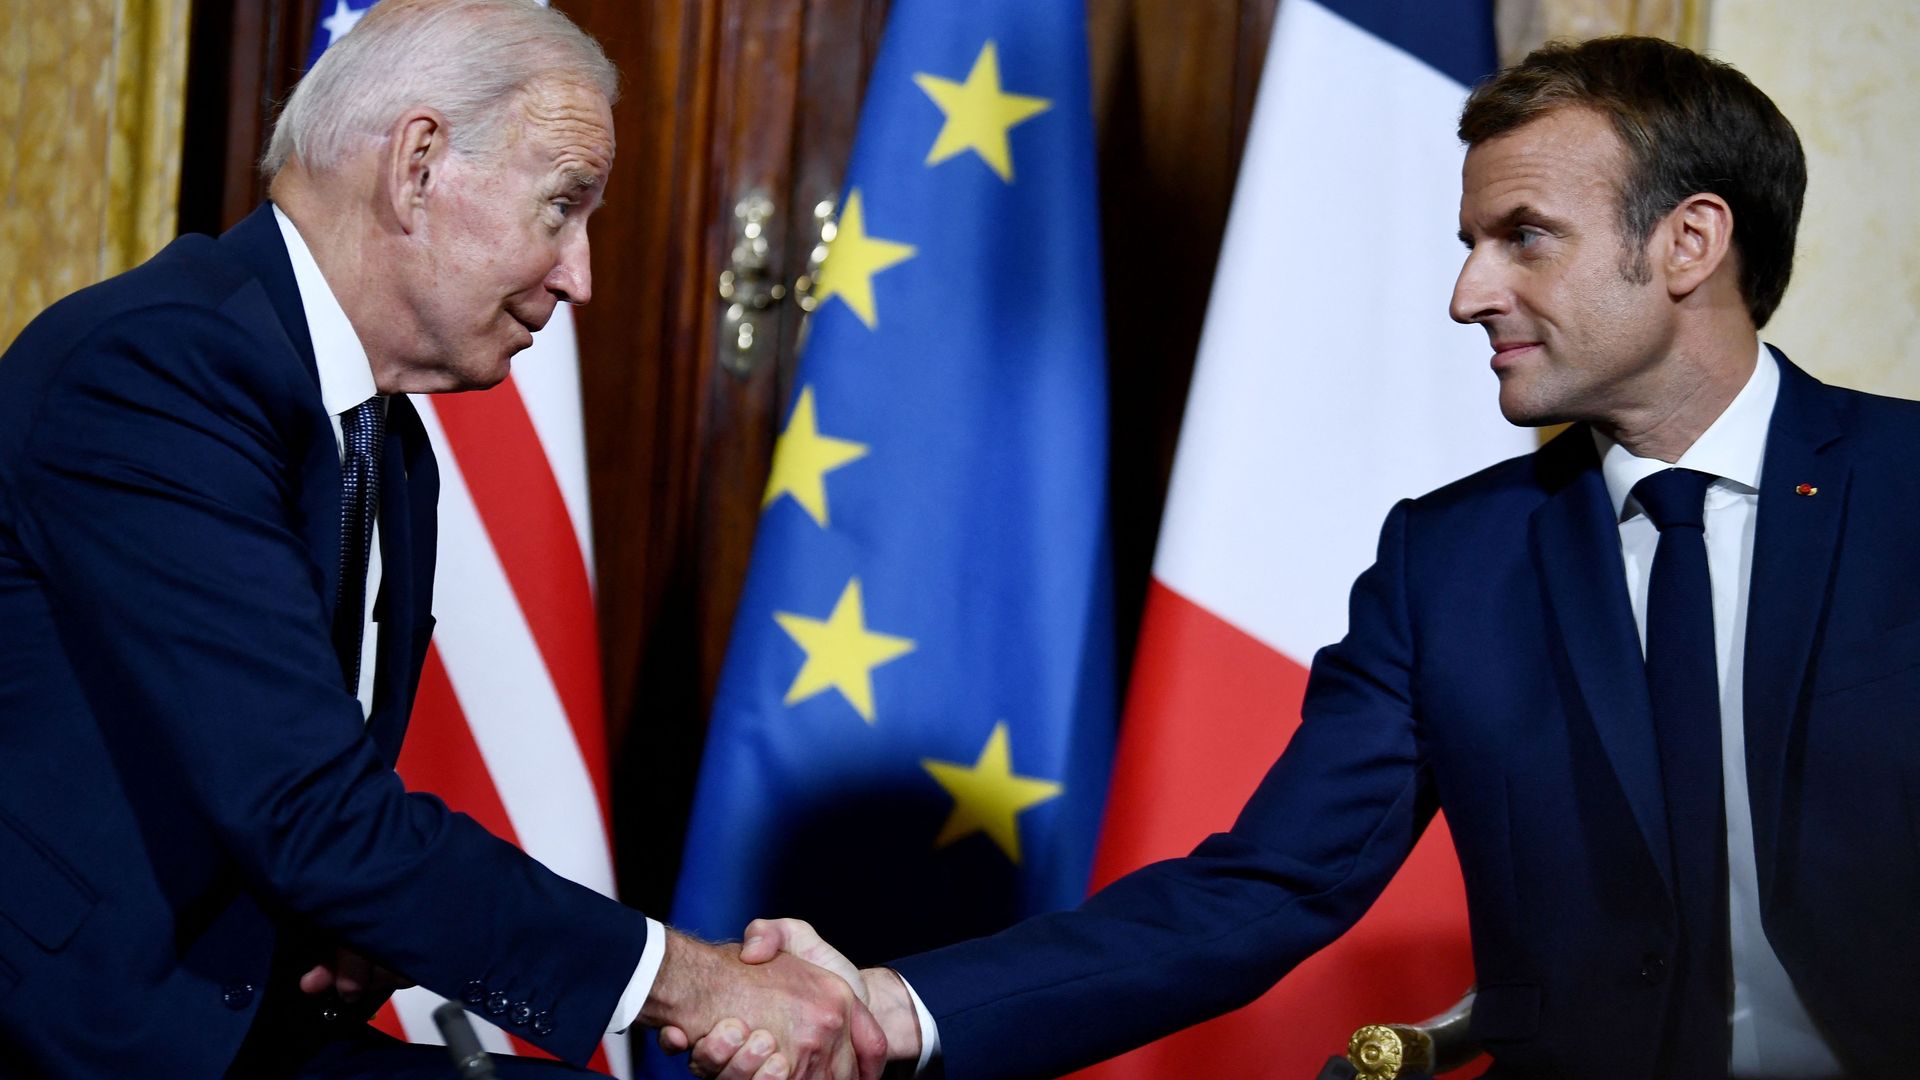 Picture of Biden and Macron shaking hands